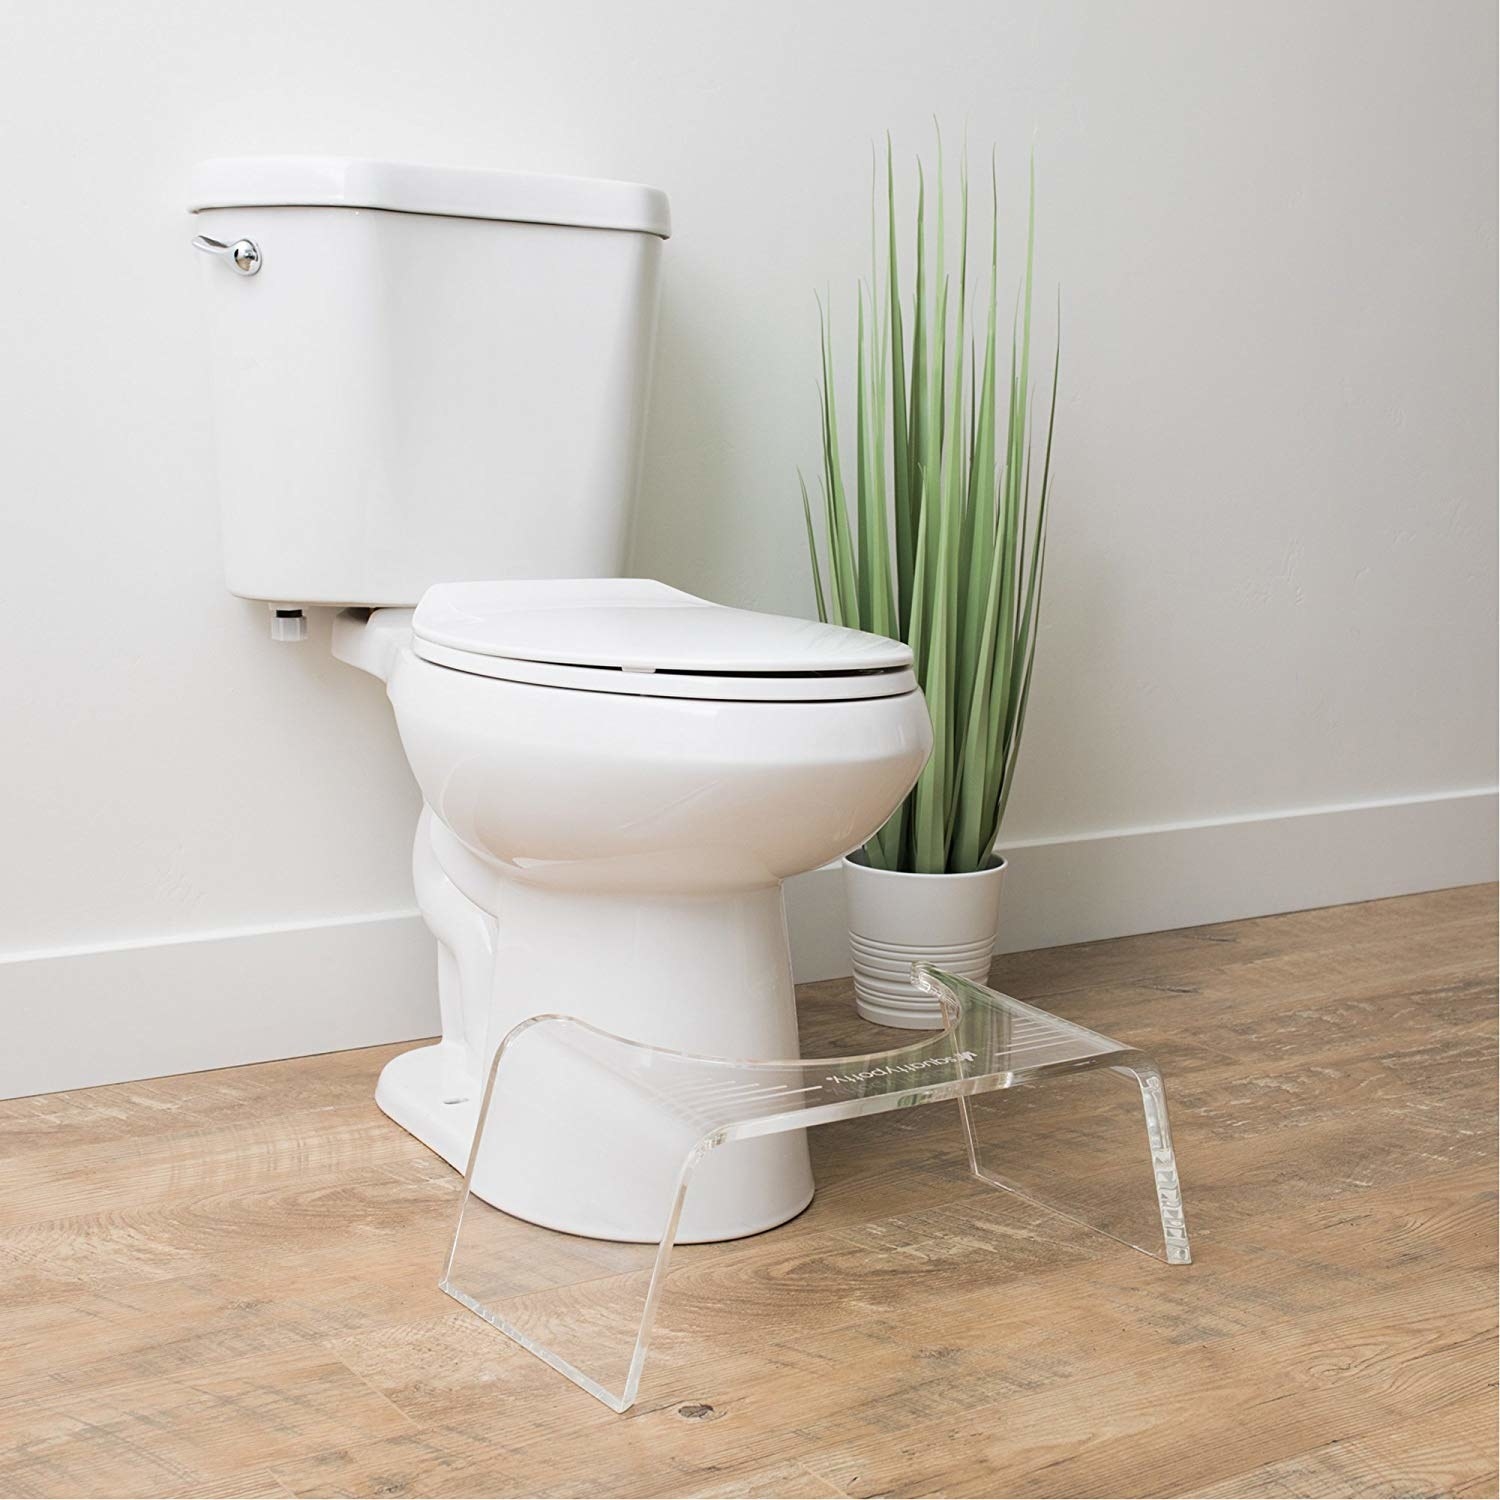 image of the clear Squatty Potty at the base of the toilet